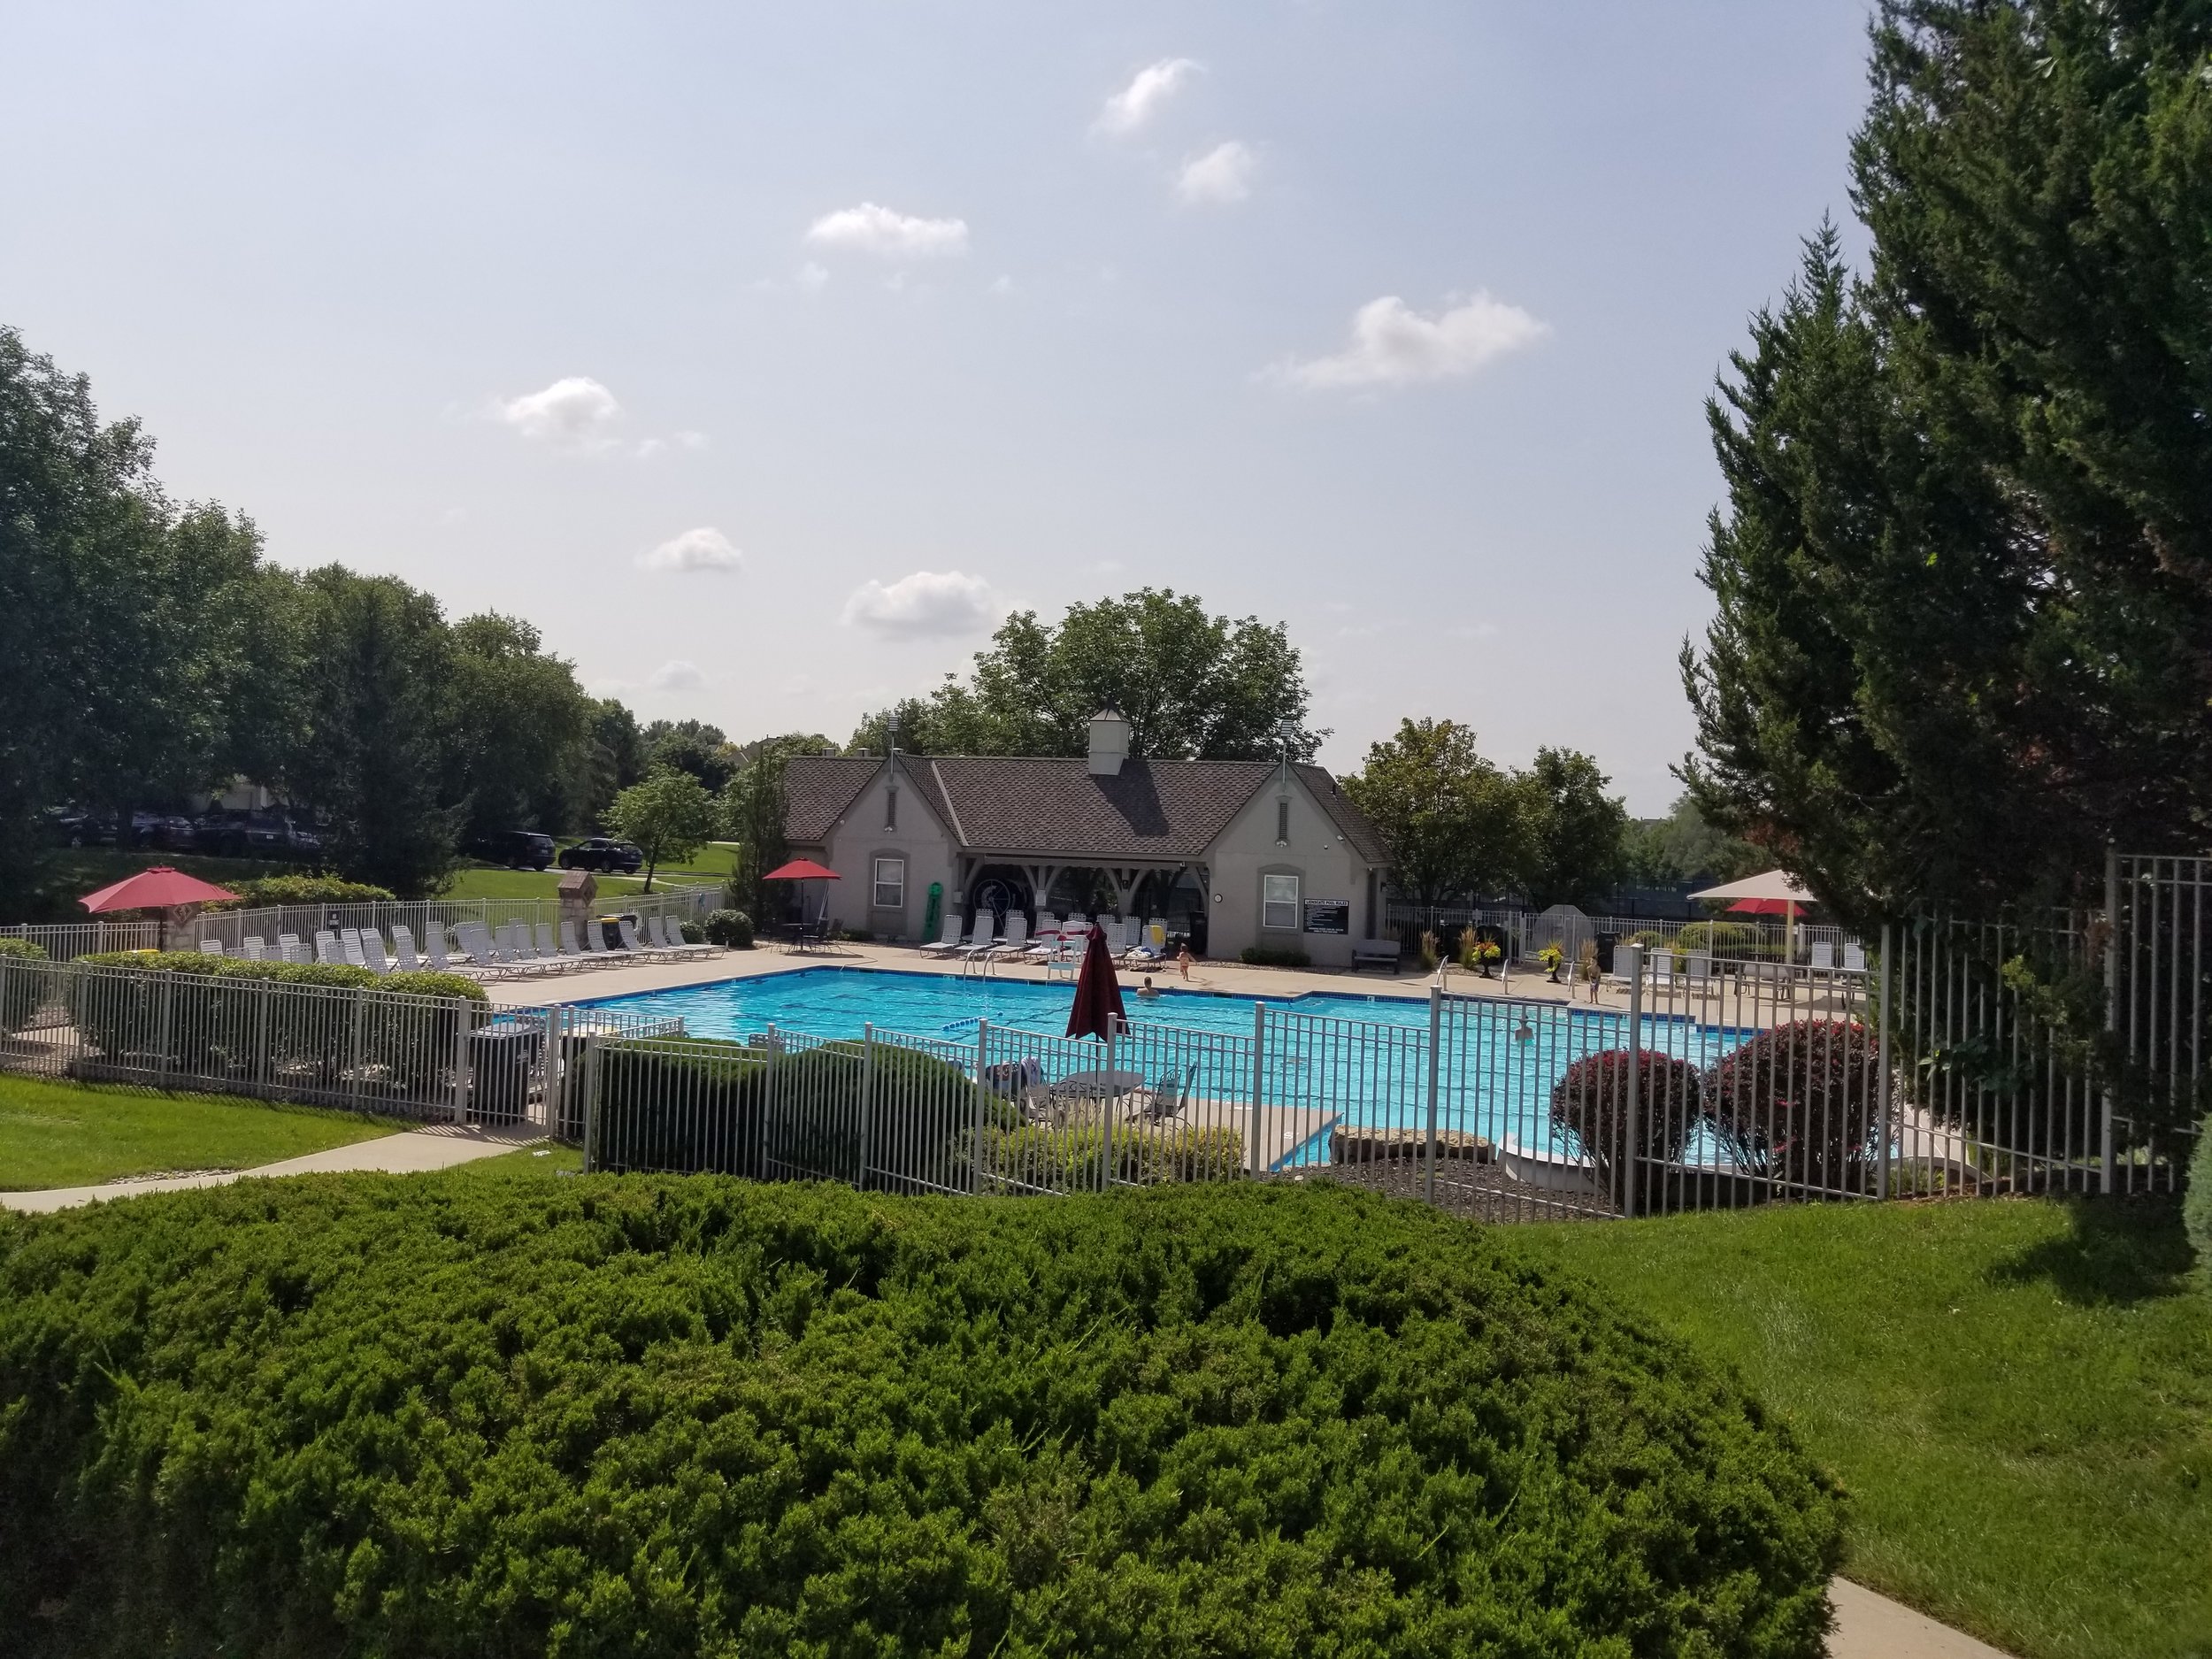 Our community pool